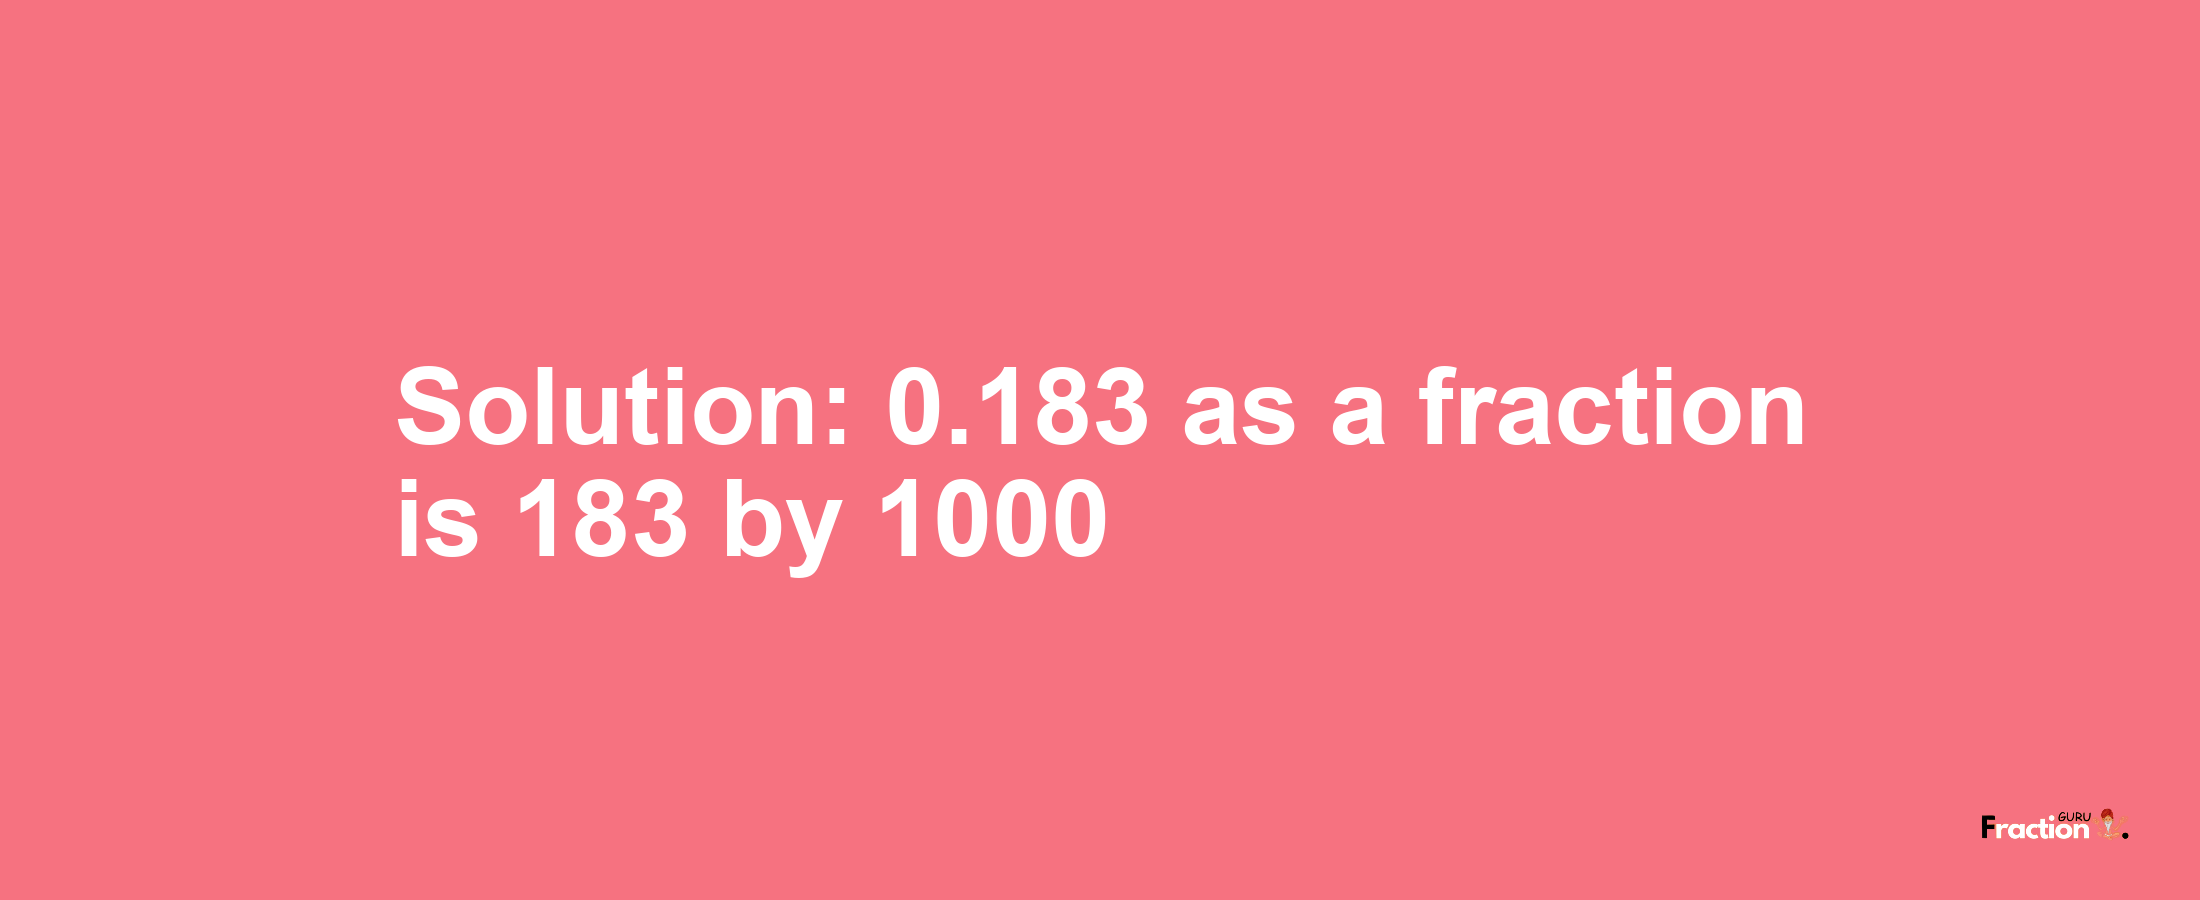 Solution:0.183 as a fraction is 183/1000